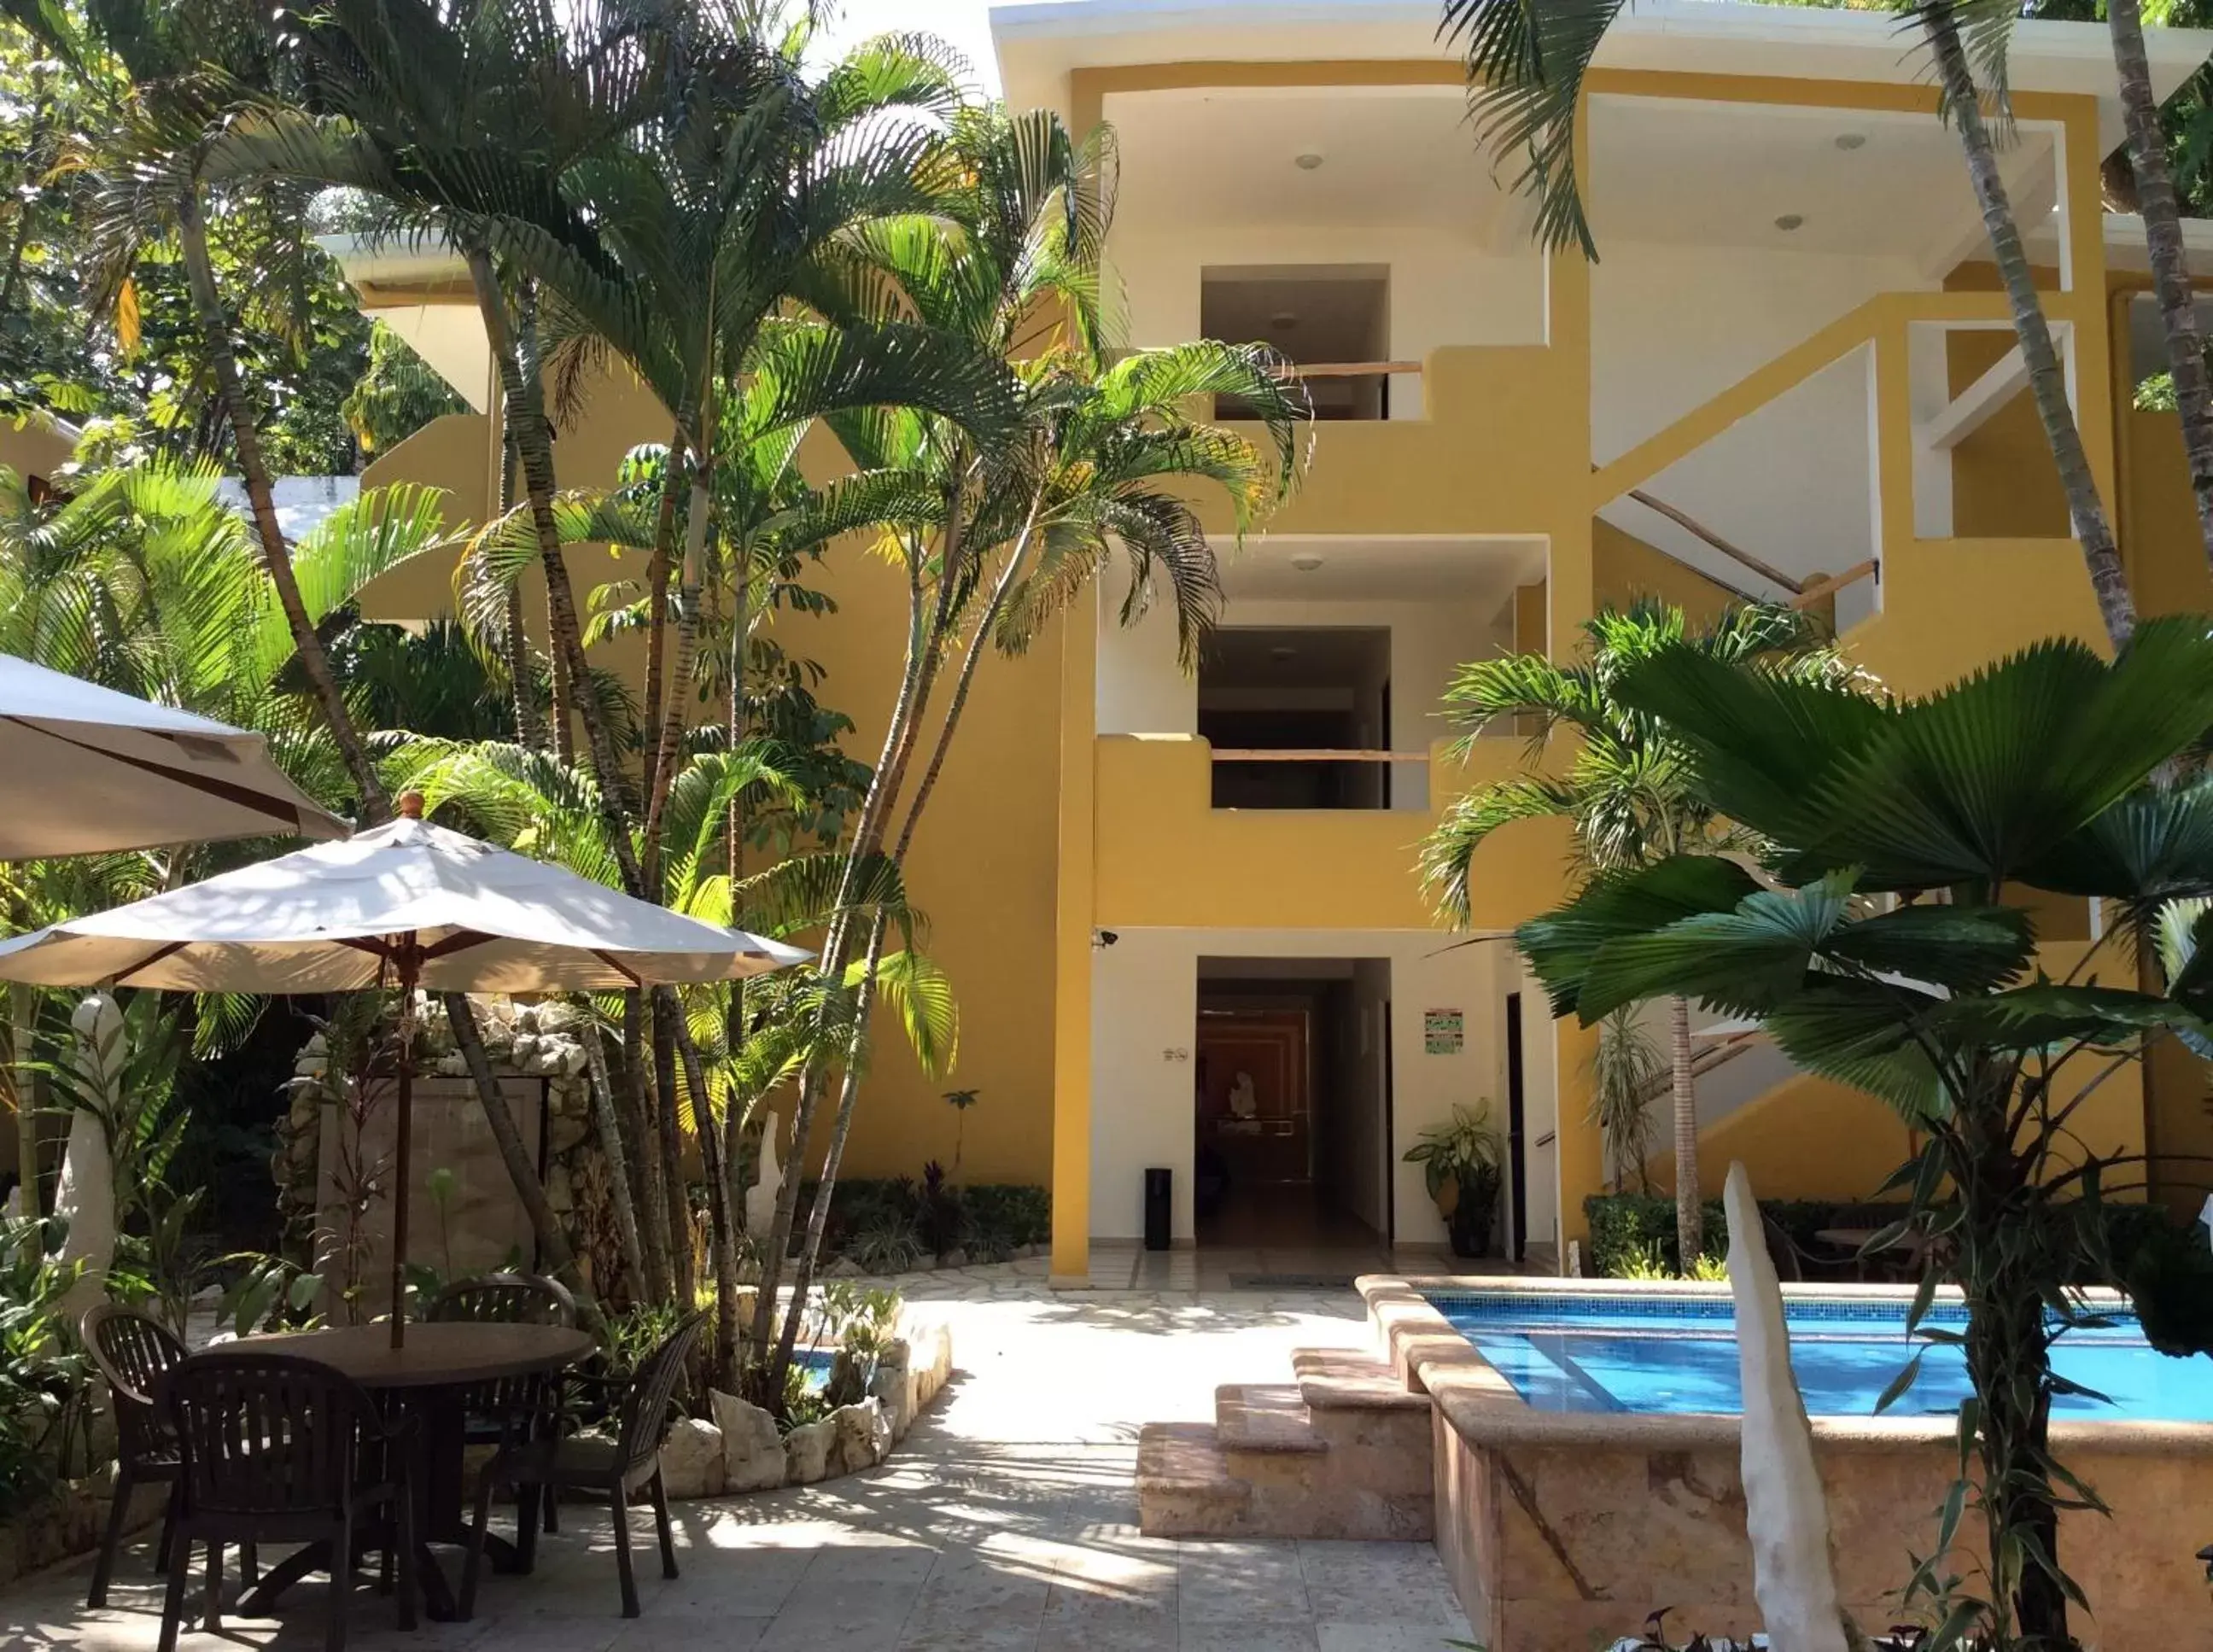 Property building, Swimming Pool in Hotel Chablis Palenque